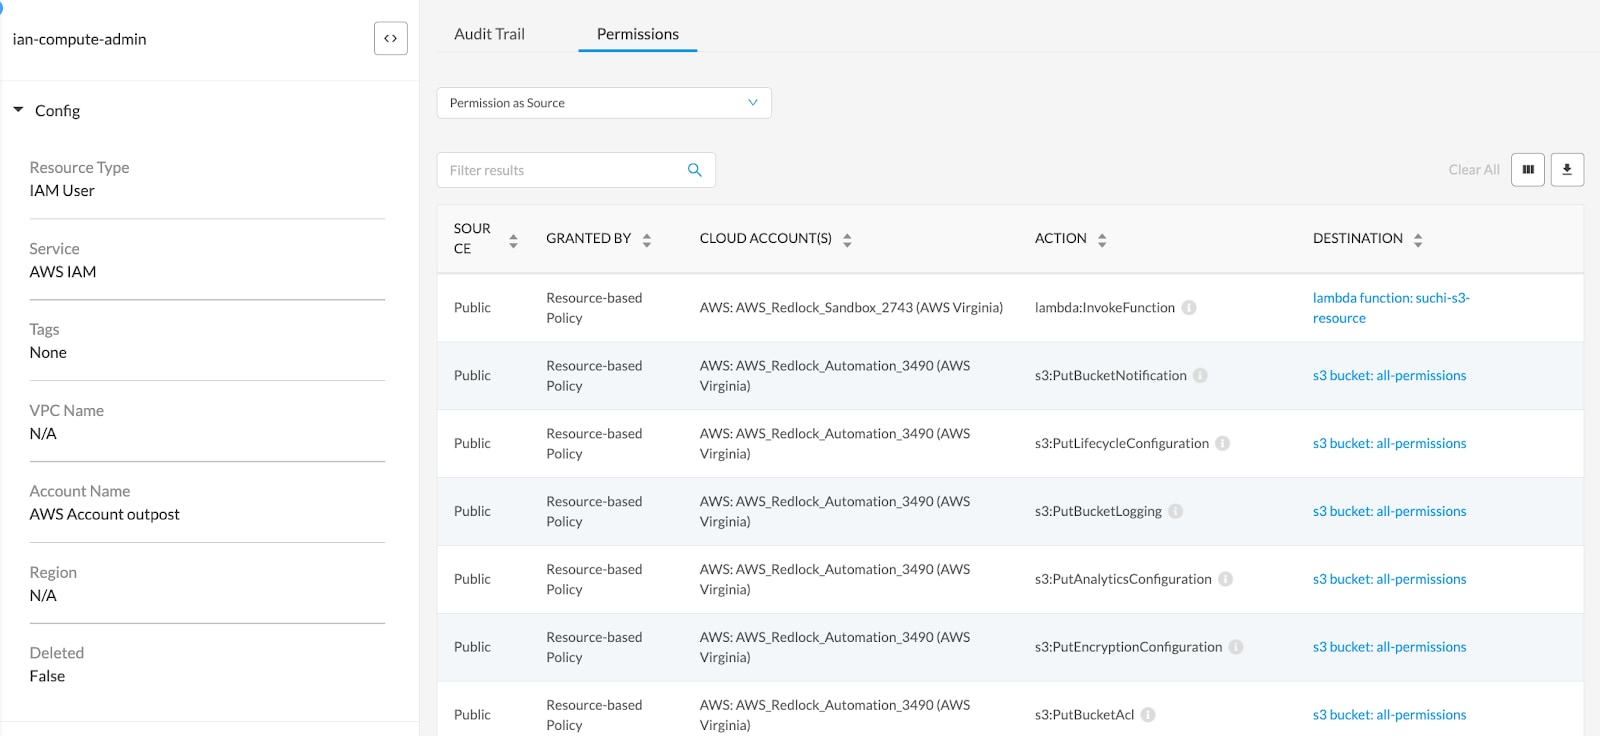 The permissions audit trail for a resource tracked in the IAM Security module.